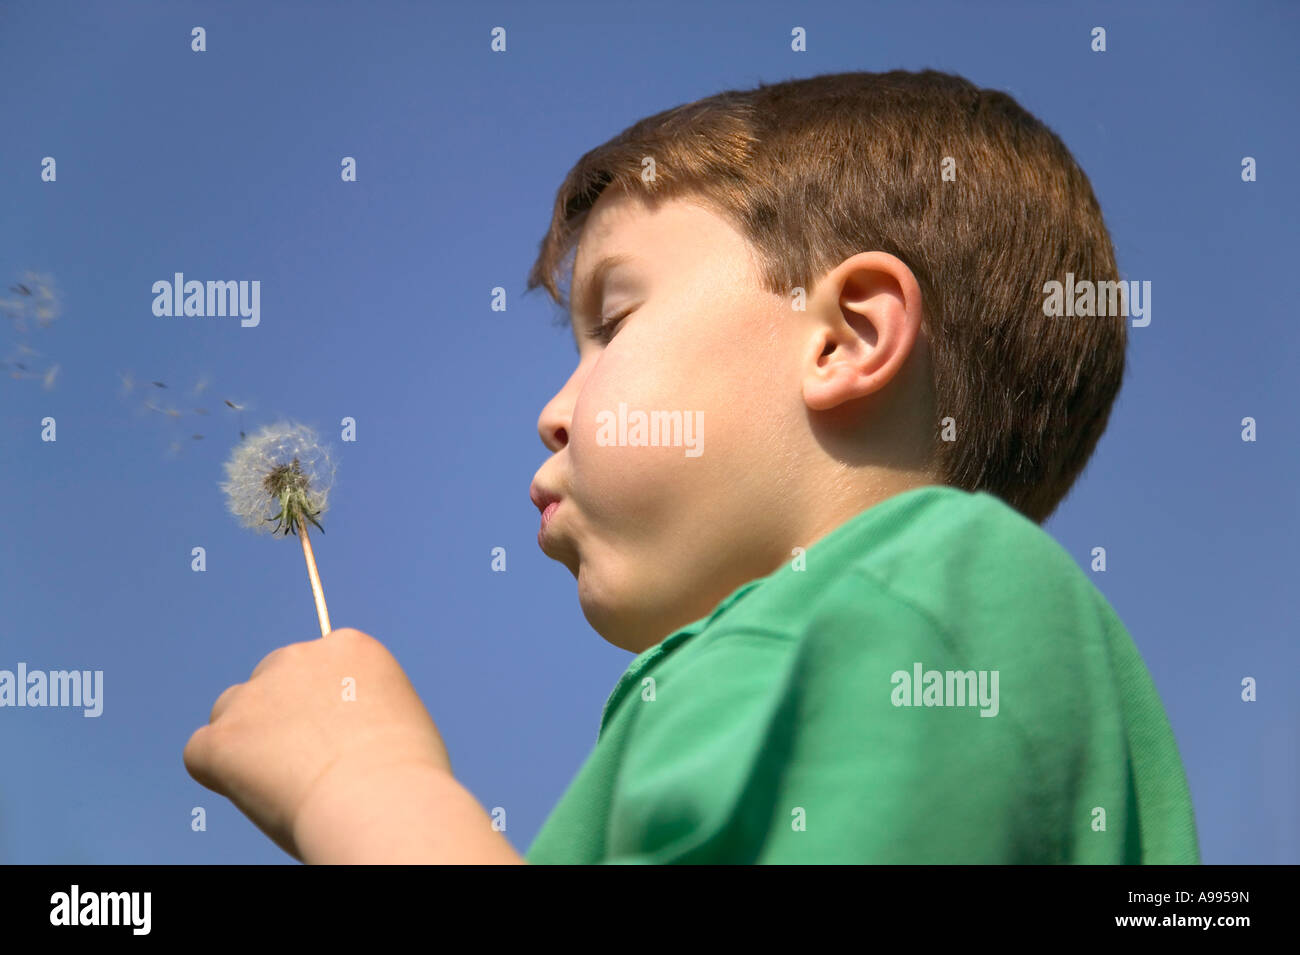 Young boy blowing the seeds from a dandelion Stock Photo